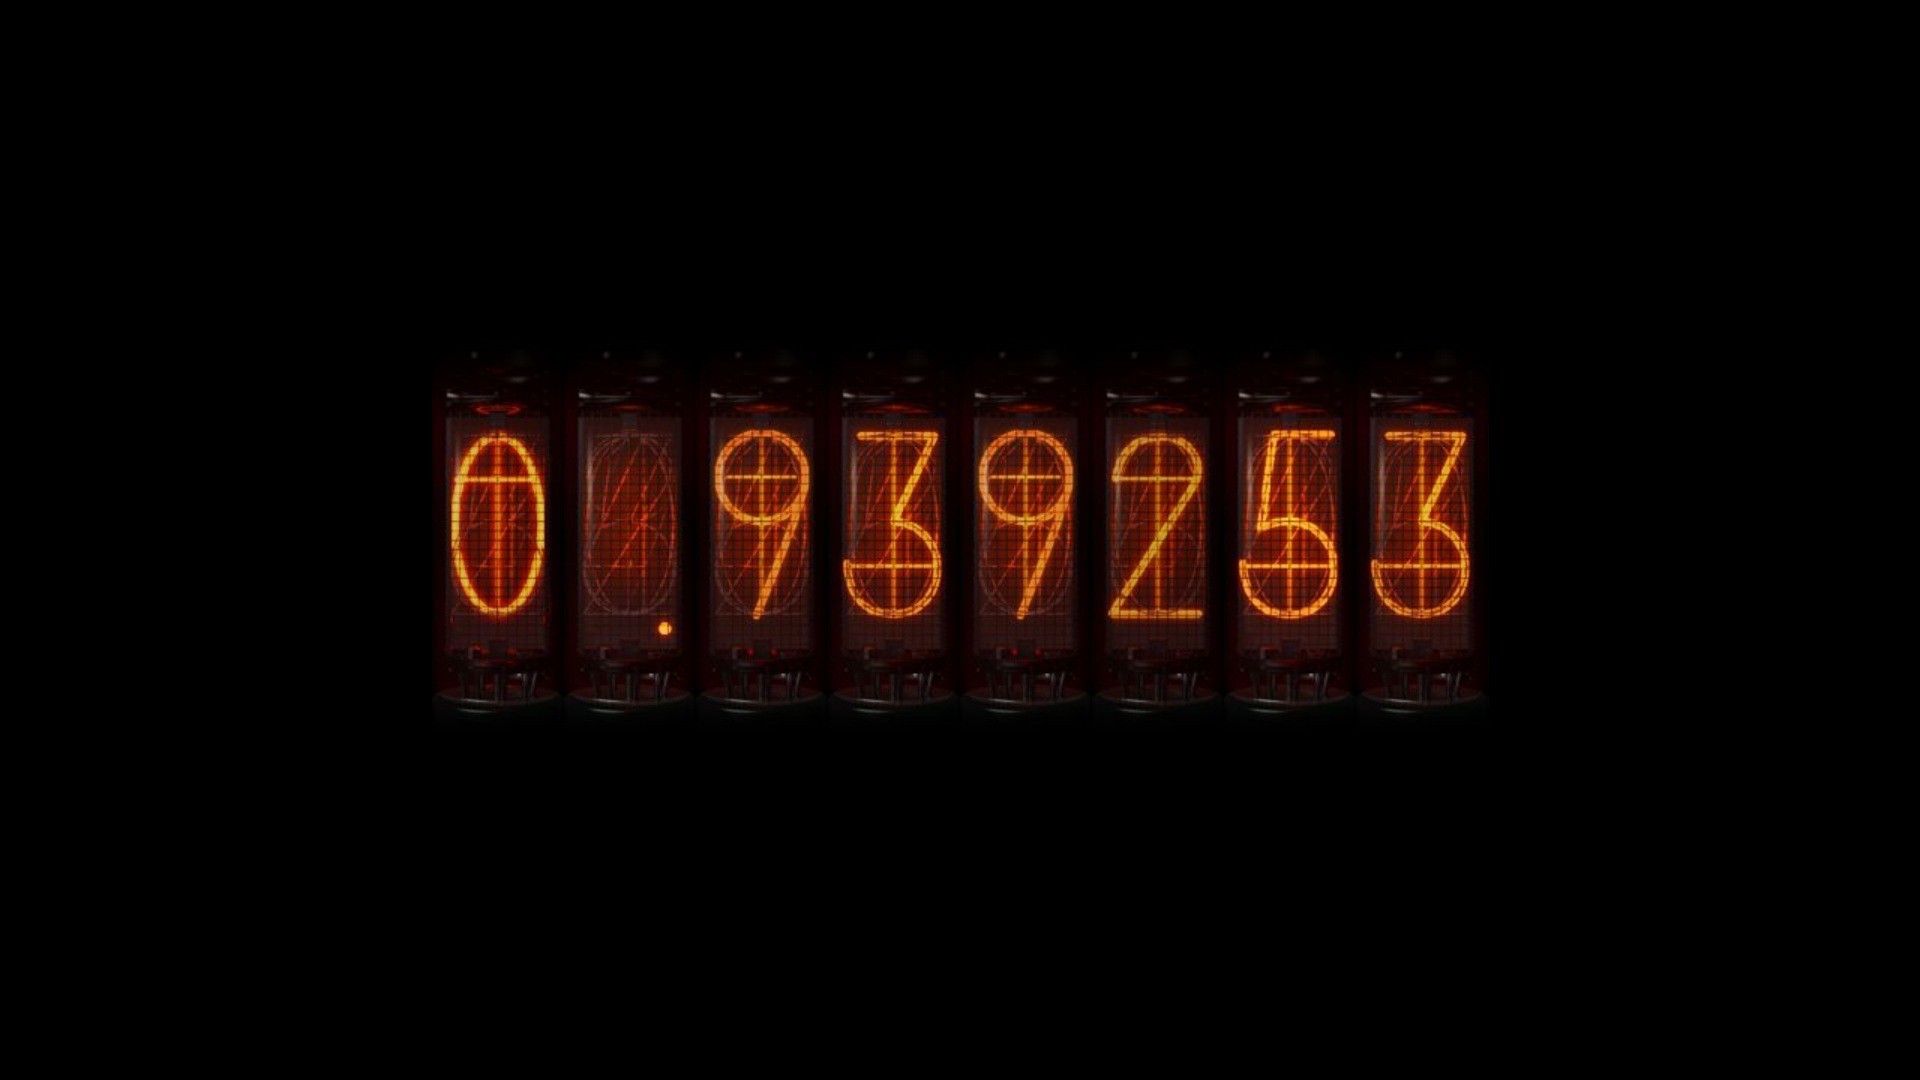 Steins Gate Anime Time Travel Divergence Meter Nixie Tubes Steins Gate Numbers 1920x1080